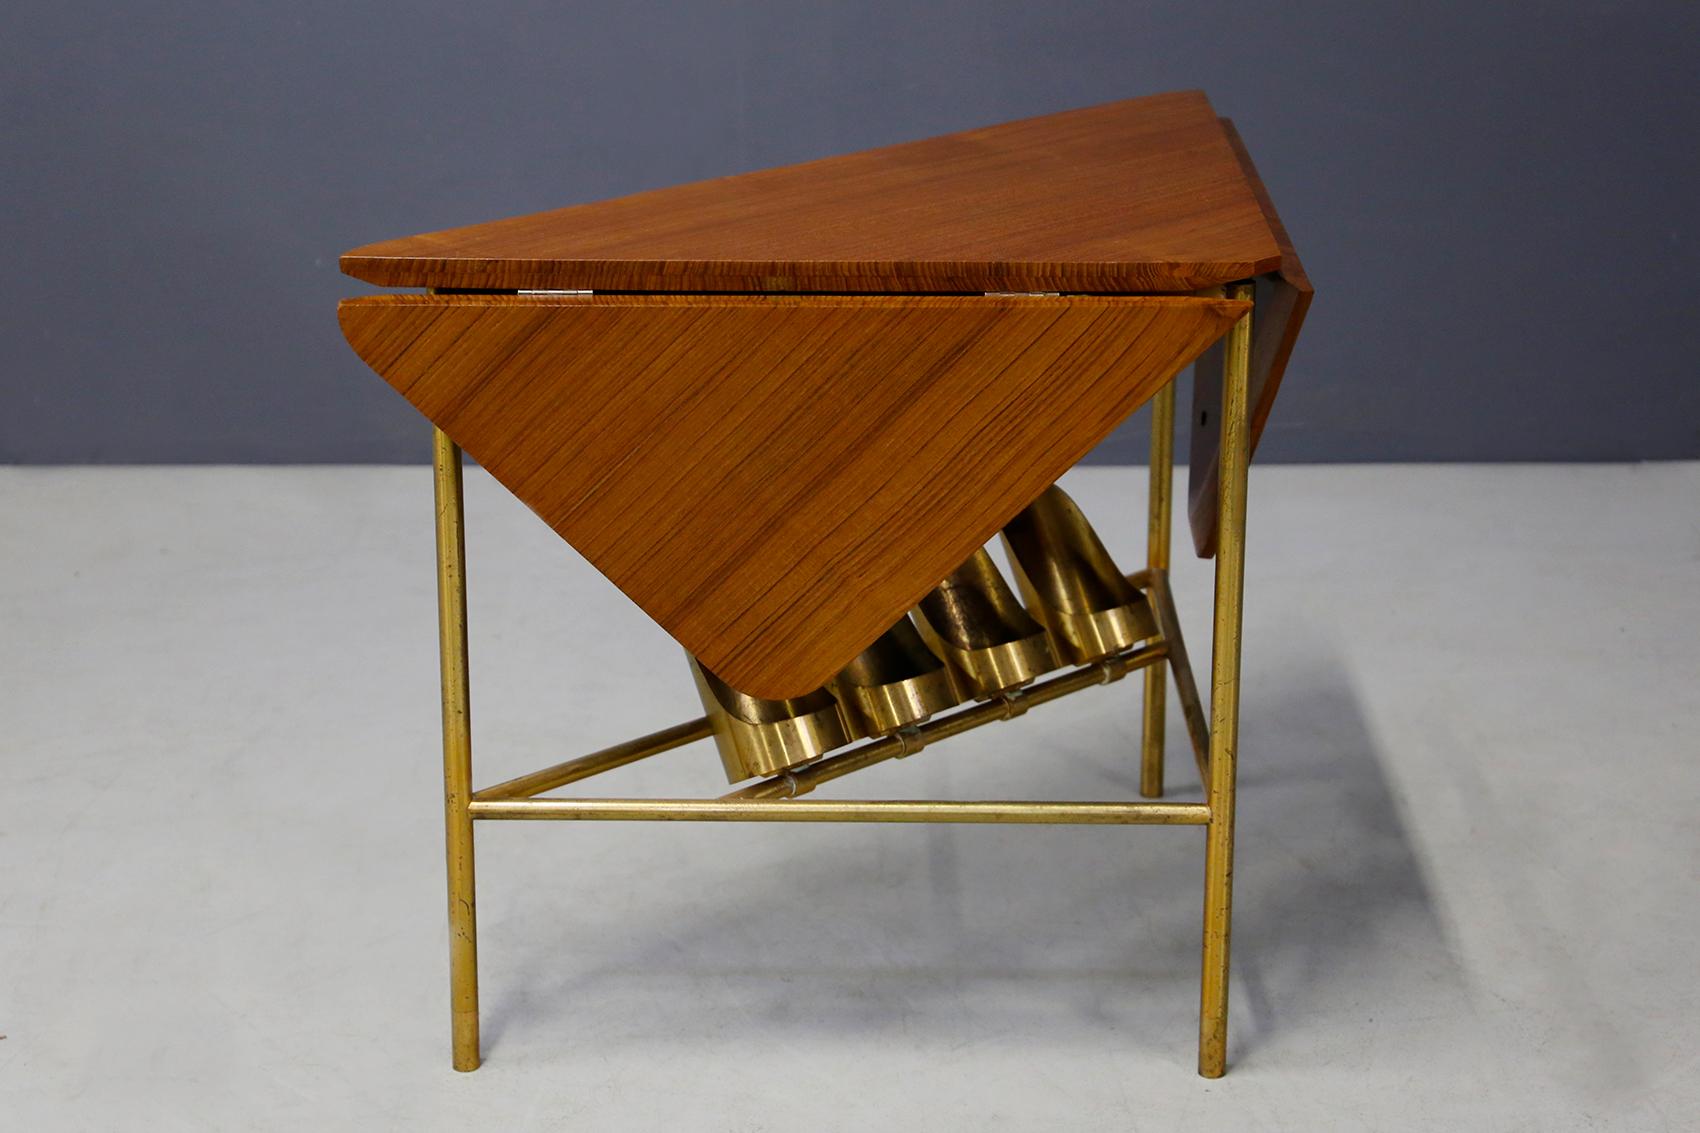 Mid-Century Modern Midcentury Coffee Table Attributed to Ignazio Gardella in Brass and Wood, 1950s